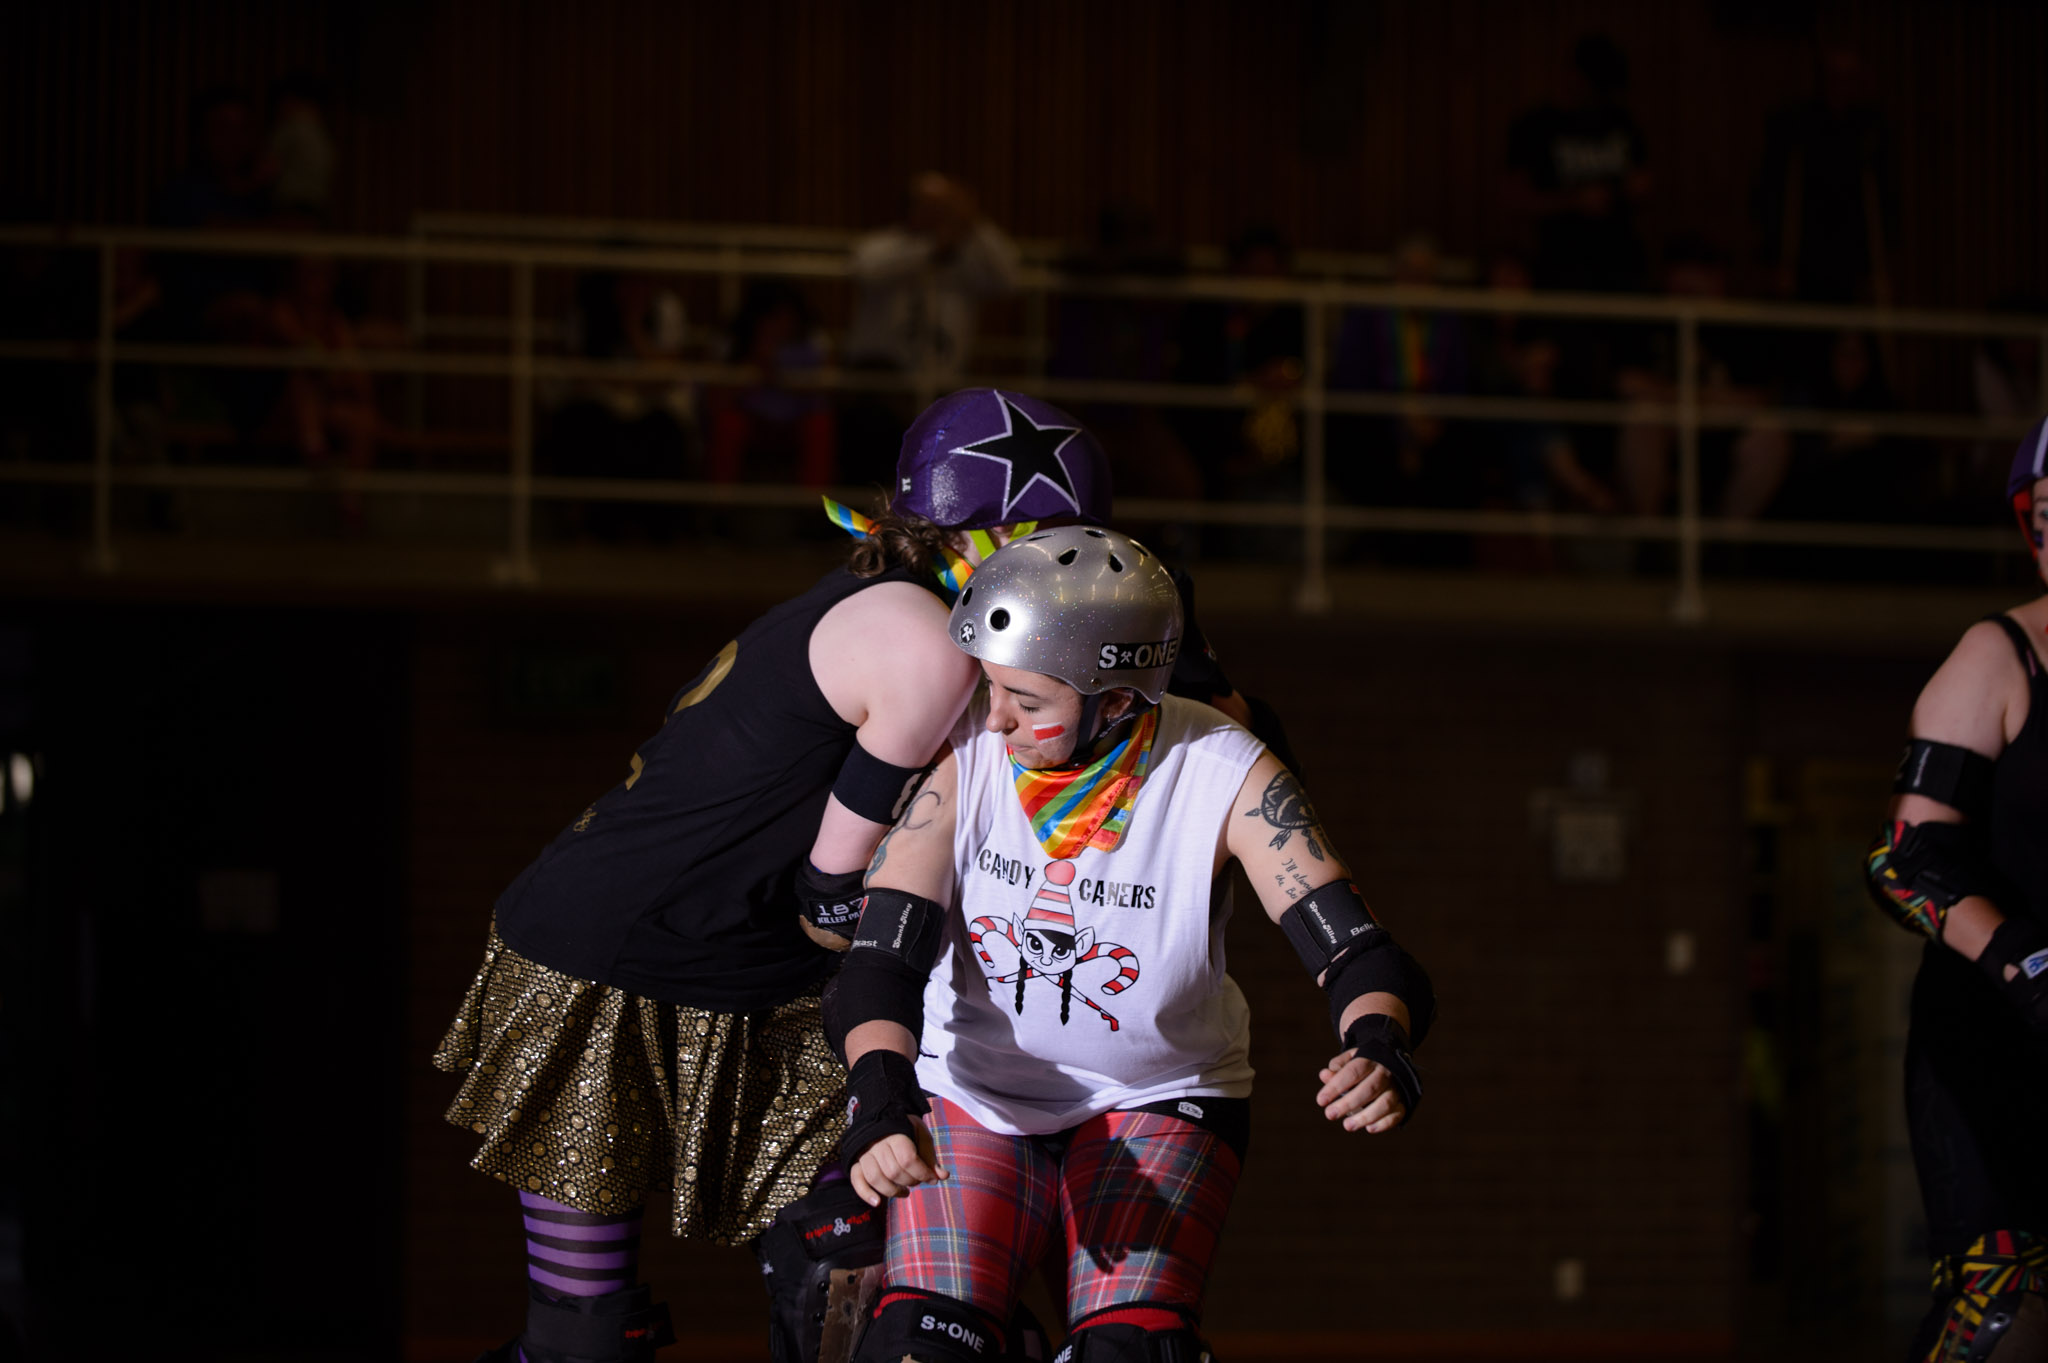 CRDL - Carnival of Carnage October 2017, Photographer: Brett Sargeant, D-eye Photography